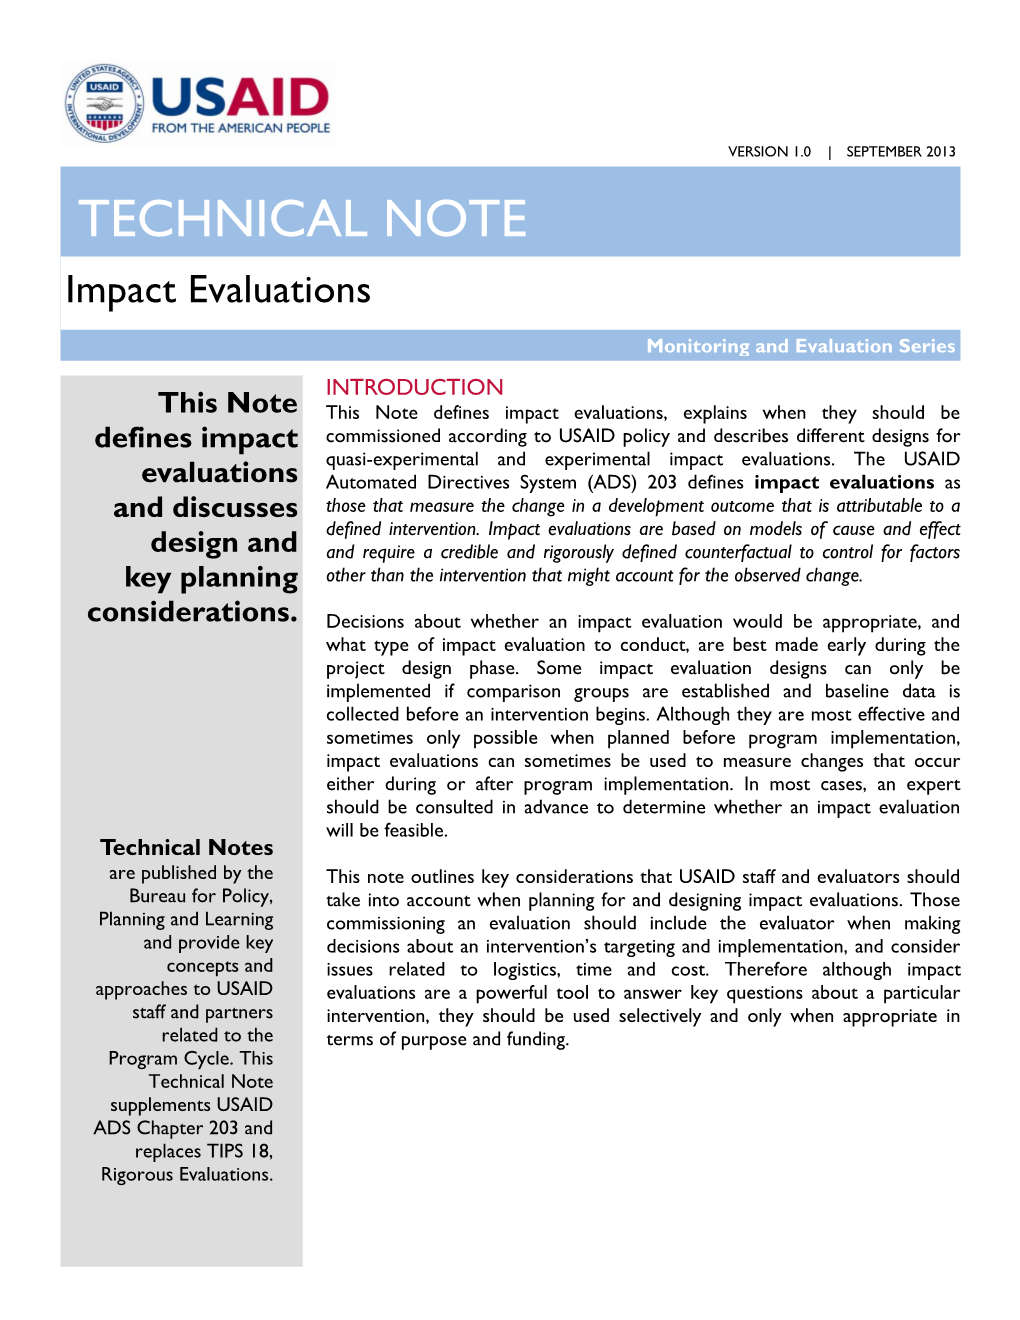 USAID Technical Note on Impact Evaluation